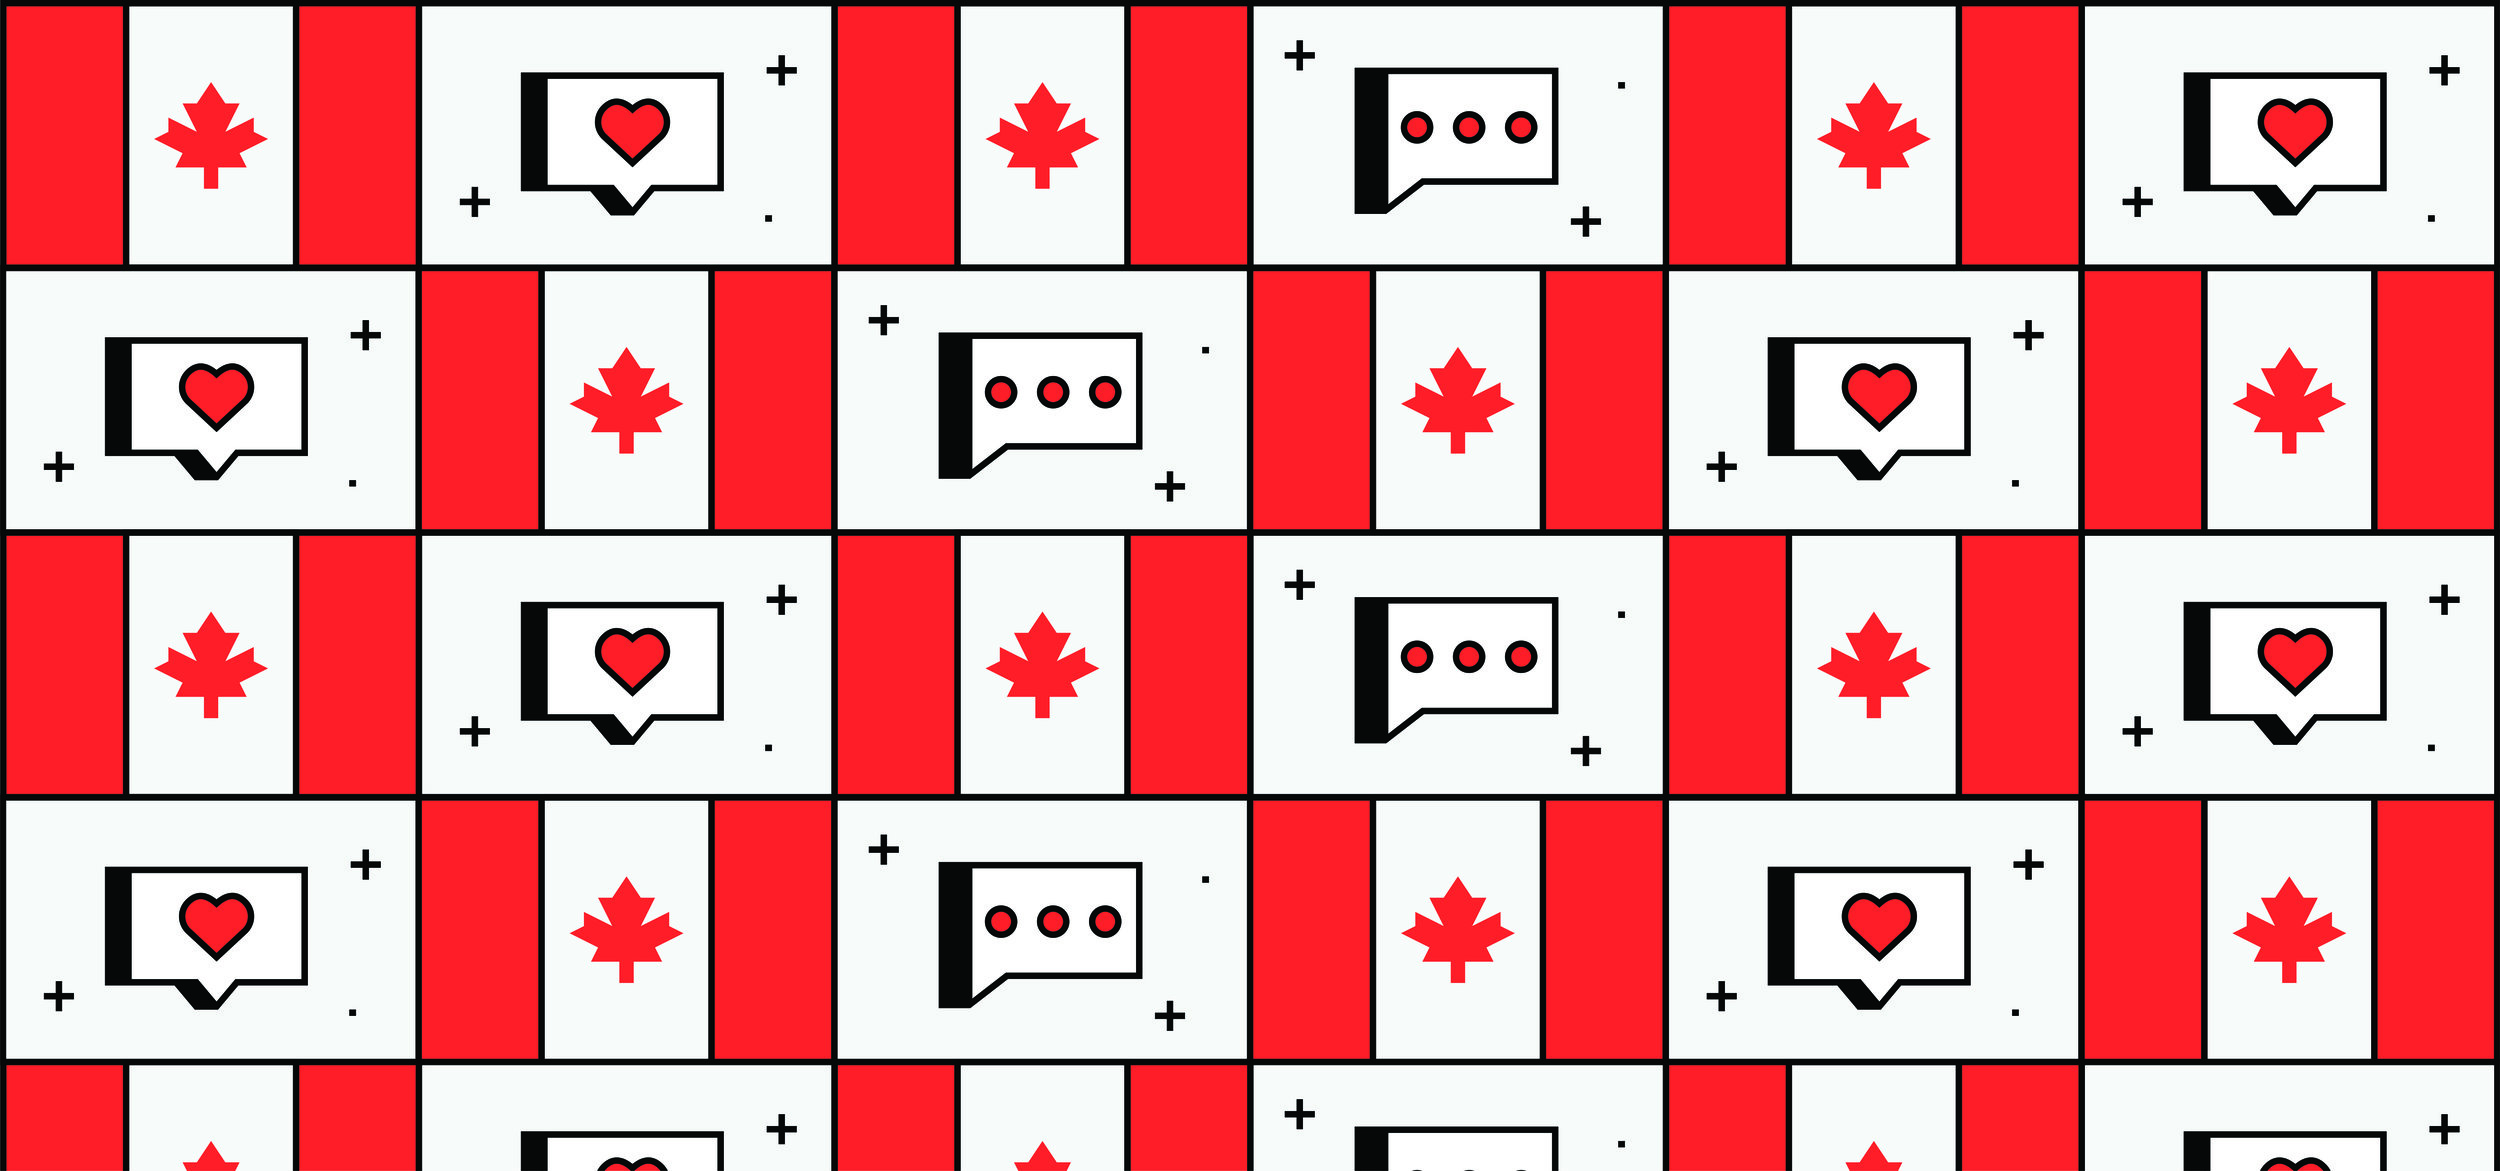 line illustration of a hero image made up of Canadian flags